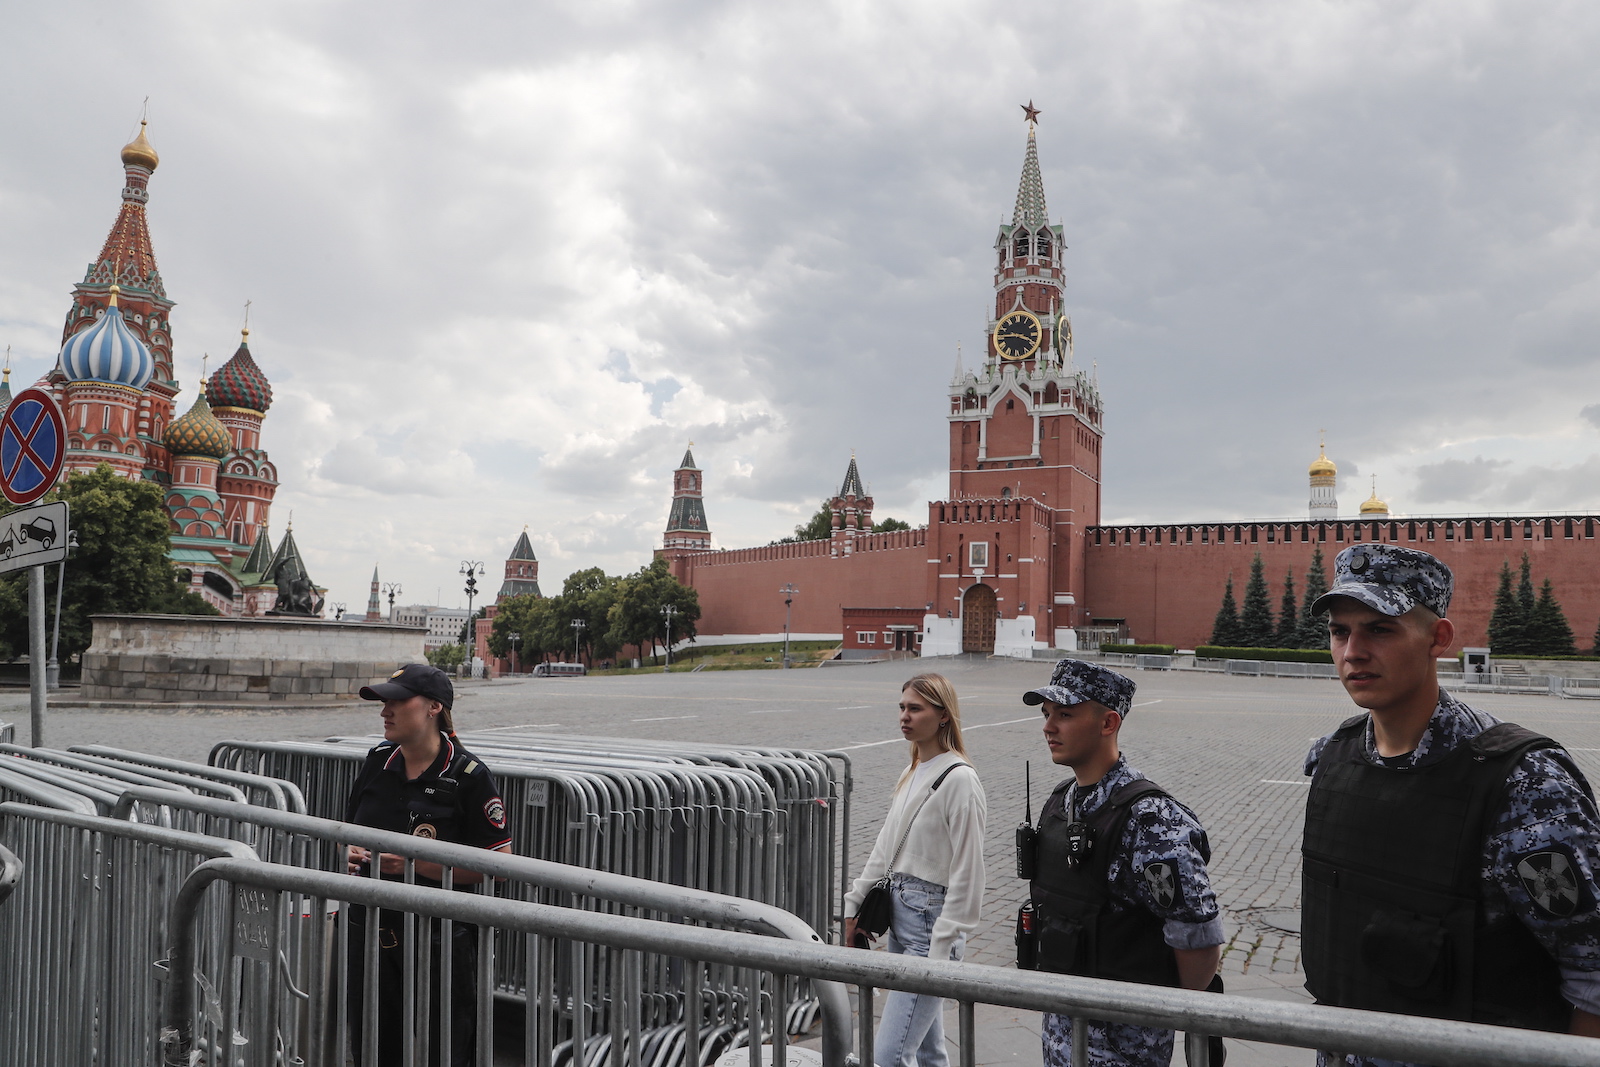 epa10712148 Russian policemen guard a closed entrance to Red Square in Moscow, Russia, 26 June 2023. The operational headquarters of Moscow and the Moscow region announced the removal of the regime of the counter-terrorist operation (CTO) operating in the region. On 24 June, counter-terrorism measures were enforced in Moscow and other Russian regions after private military company (PMC) Wagner Group chief Yevgeny Prigozhin claimed that his troops had occupied the building of the headquarters of the Southern Military District in Rostov-on-Don, demanding a meeting with Russia's defense chiefs. Belarusian President Lukashenko, a close ally of Putin, negotiated a deal with Wagner chief Prigozhin to stop the movement of the group's fighters across Russia, the press service of the President of Belarus reported. The negotiations were said to have lasted for the entire day. Prigozhin announced that Wagner fighters were turning their columns around and going back in the other direction, returning to their field camps.  EPA/MAXIM SHIPENKOV